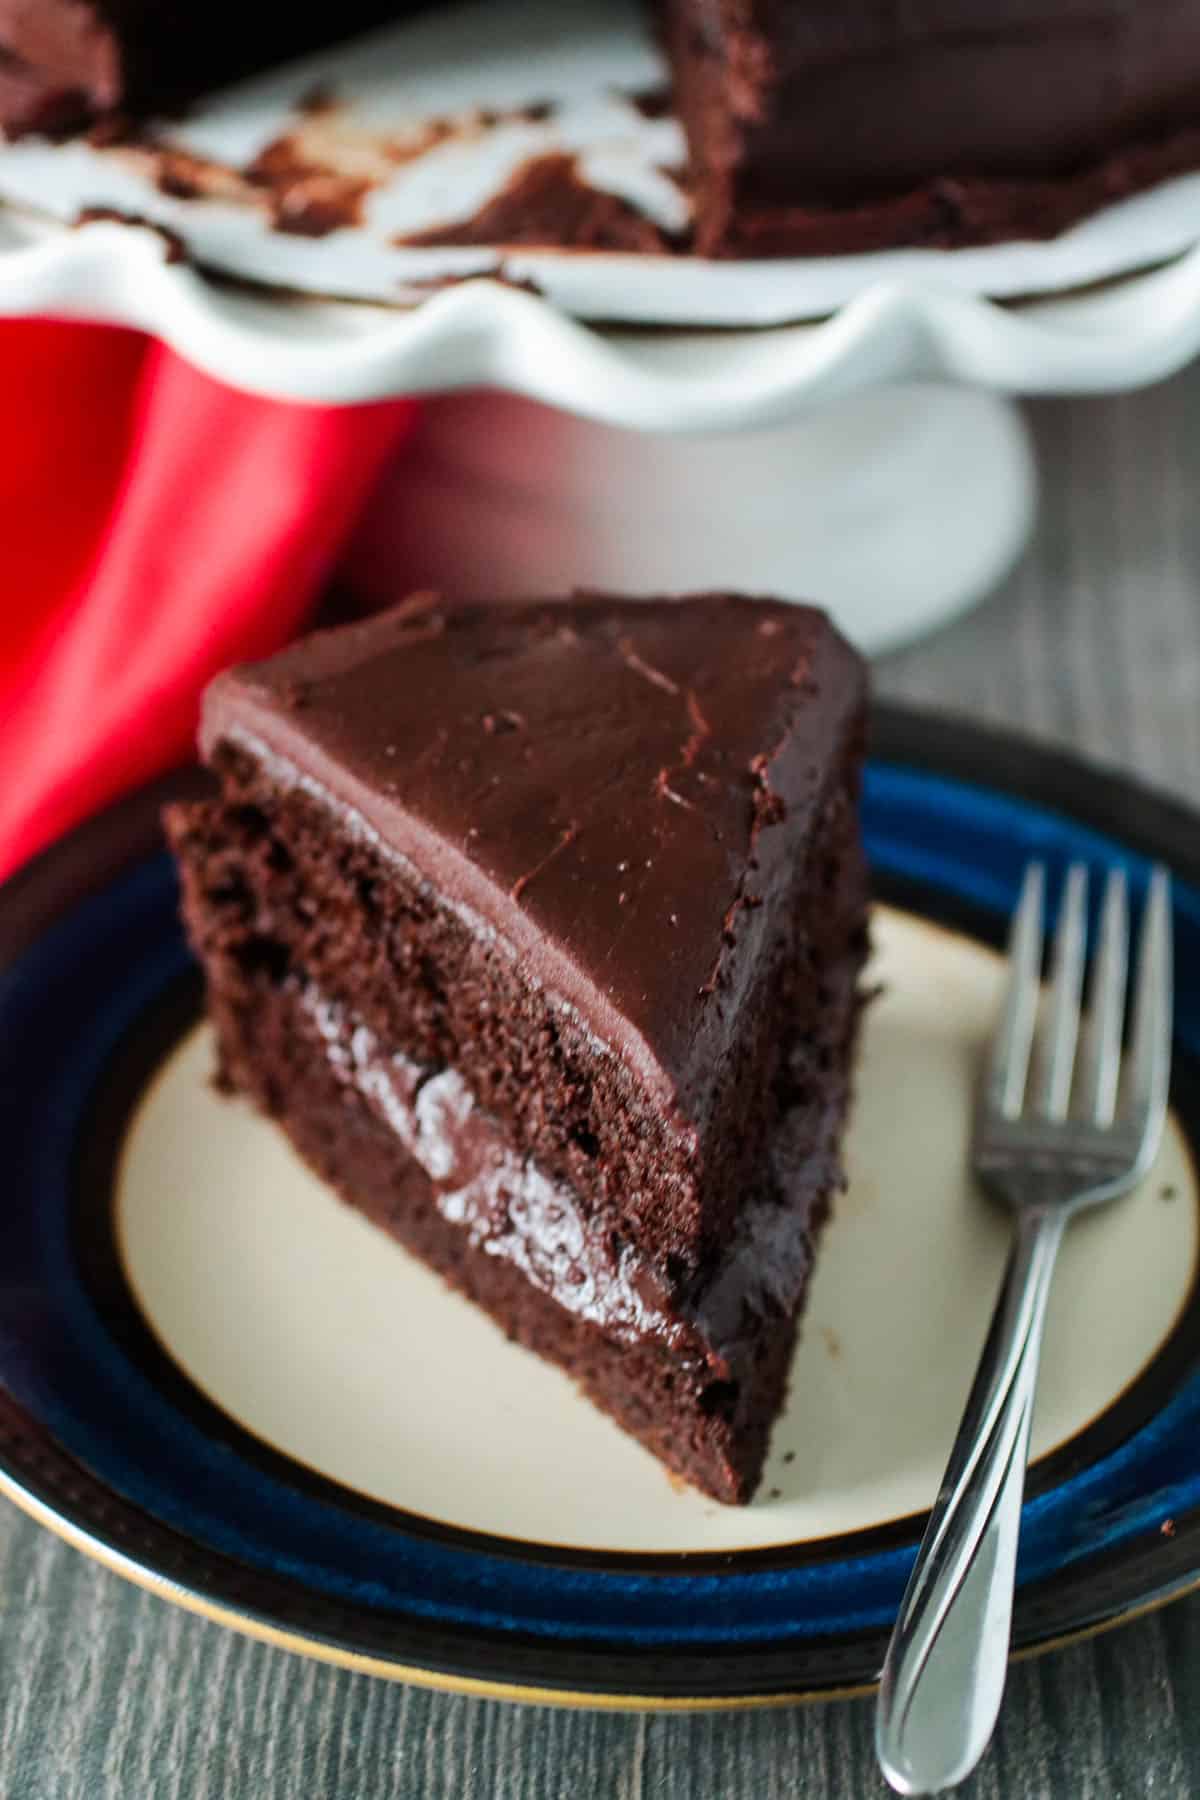 A slice of the chocolate cake on a plate with a fork.